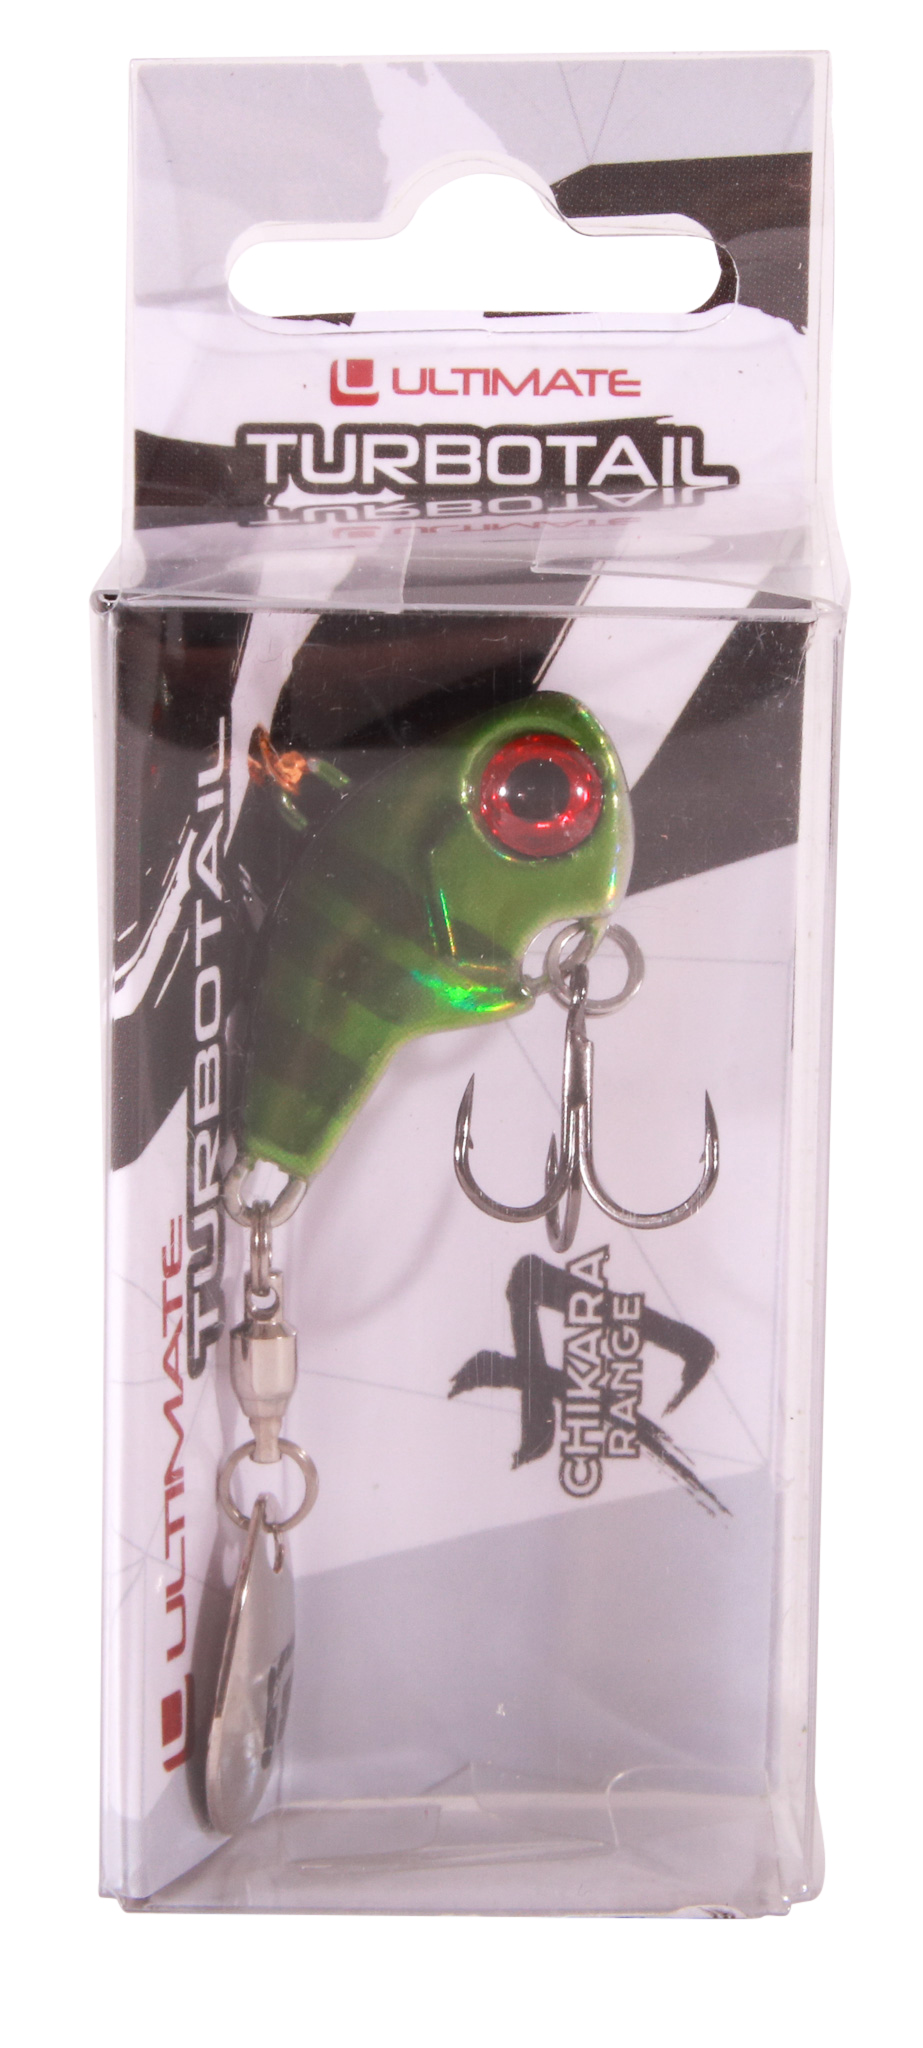 Ultimate Turbotail Jigspinner 21g